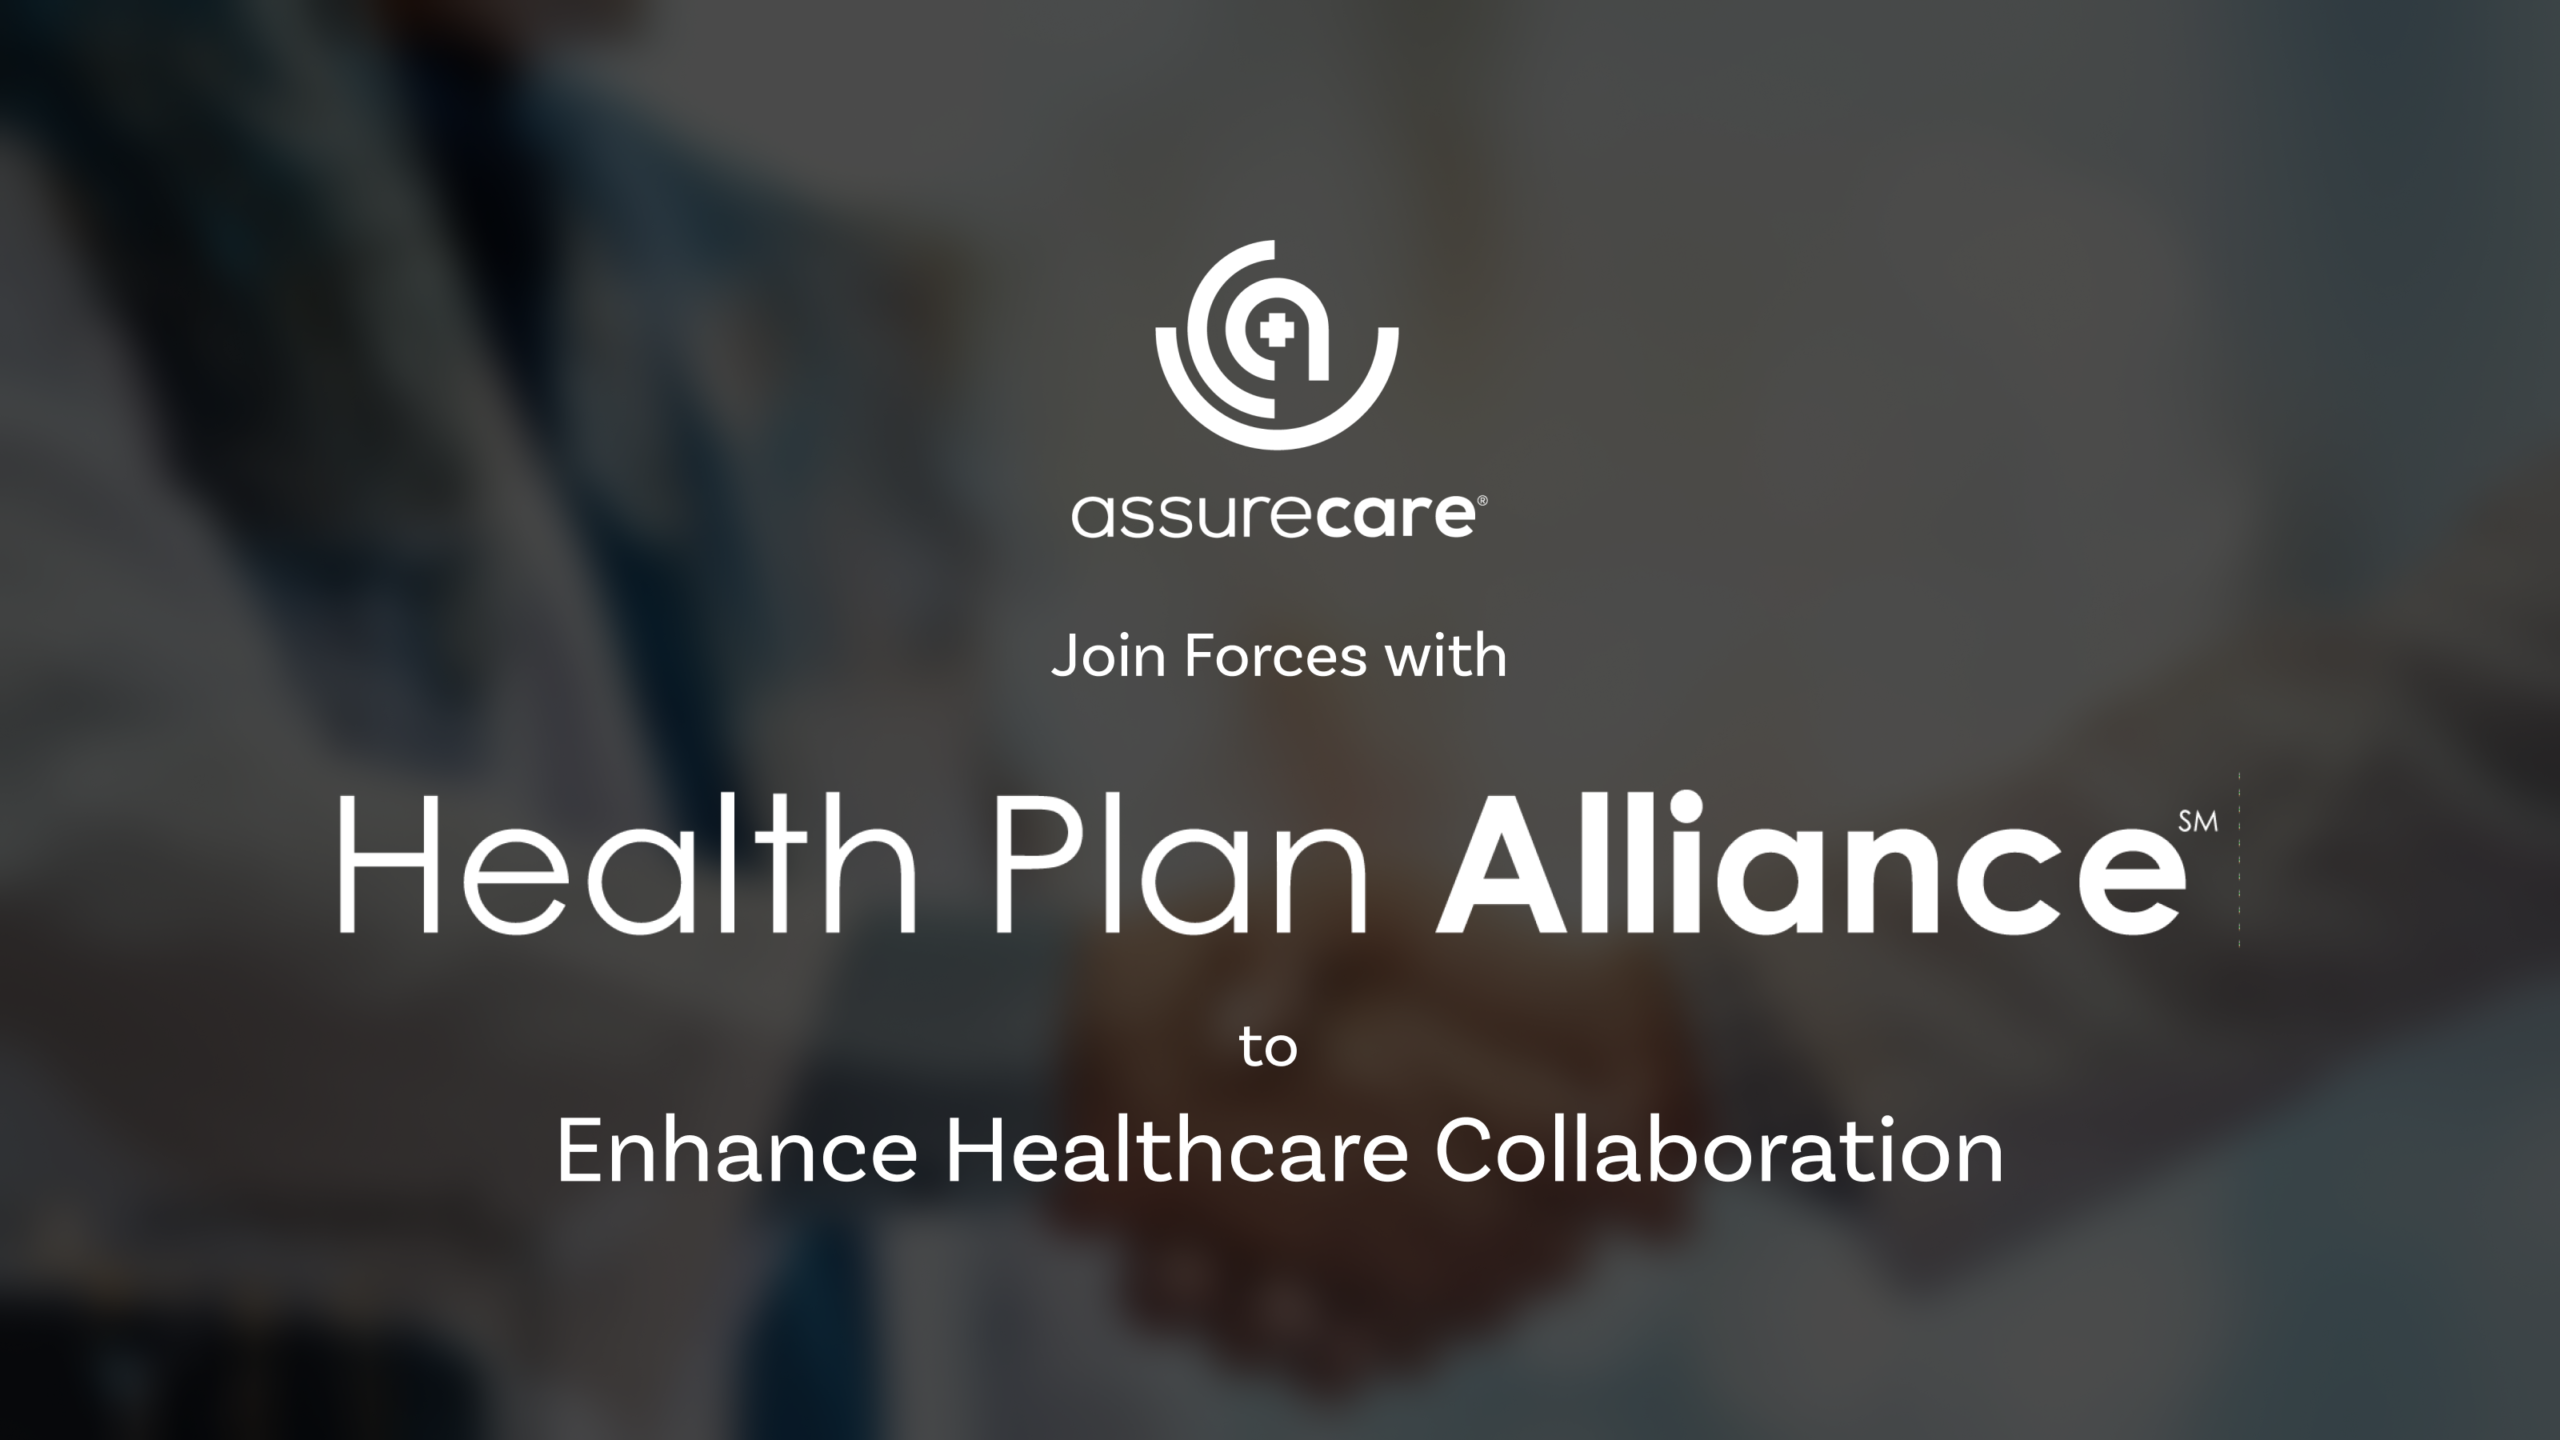 AssureCare Joins Forces with Health Plan Alliance to Enhance Healthcare Collaboration